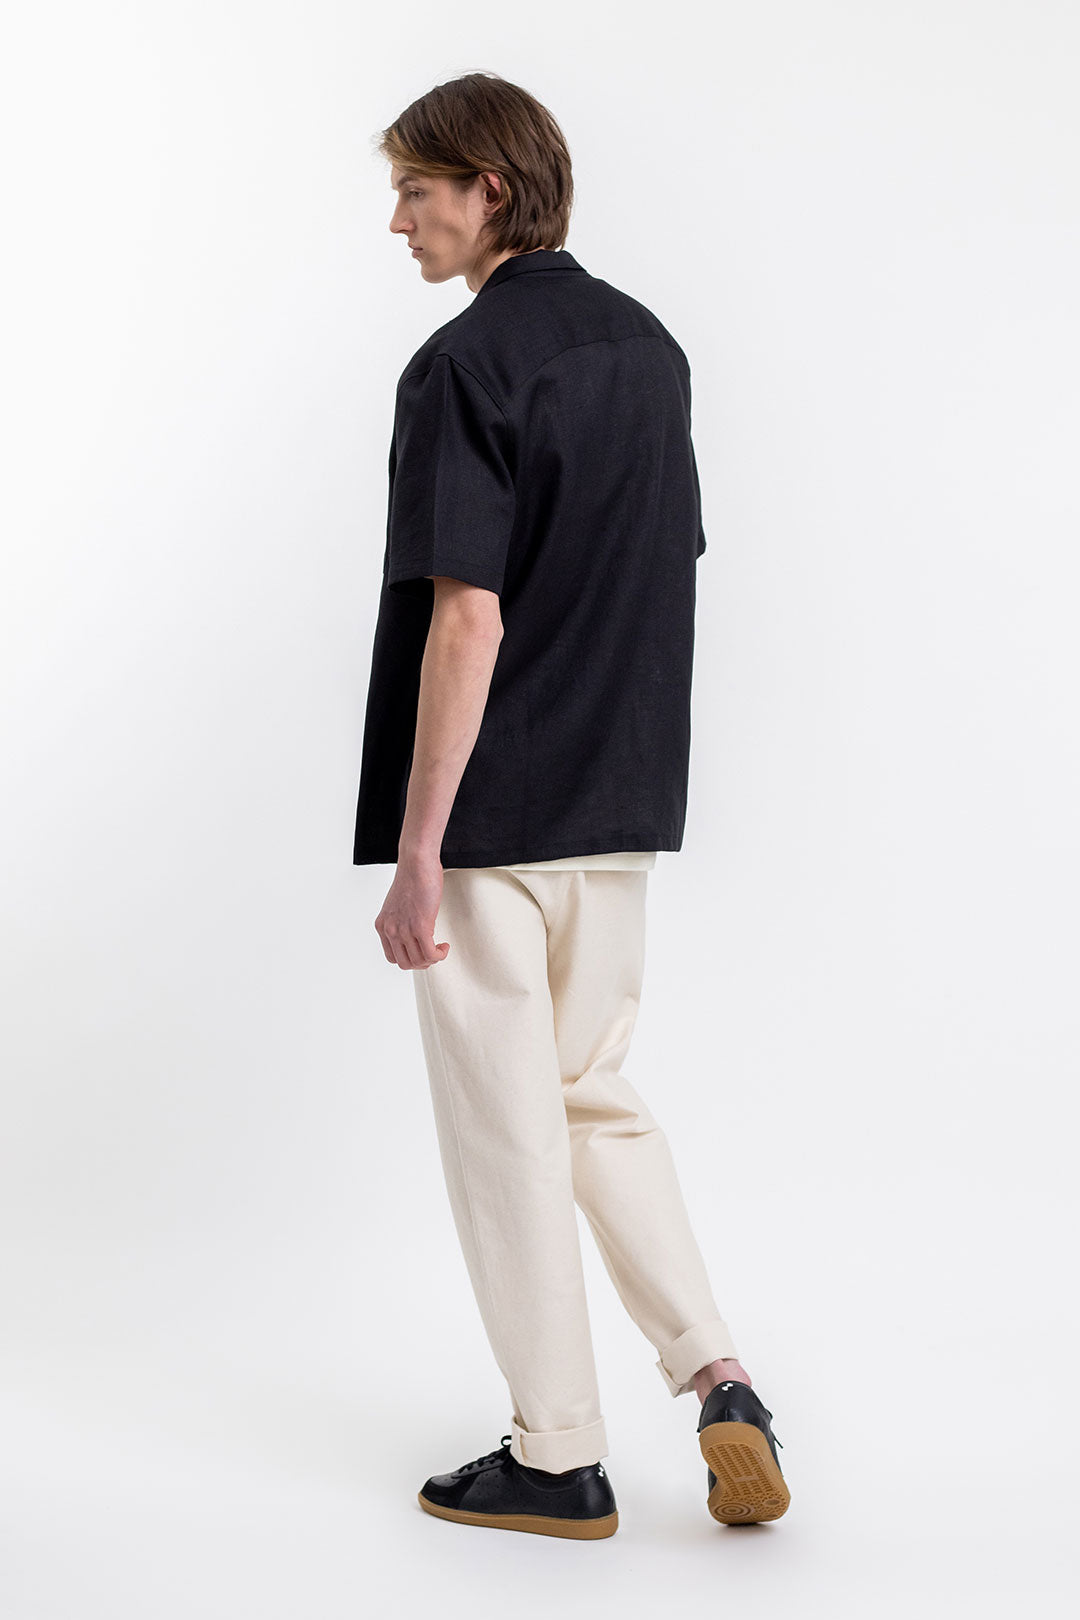 Black, short-sleeved bowling shirt made from 100% linen by Rotholz